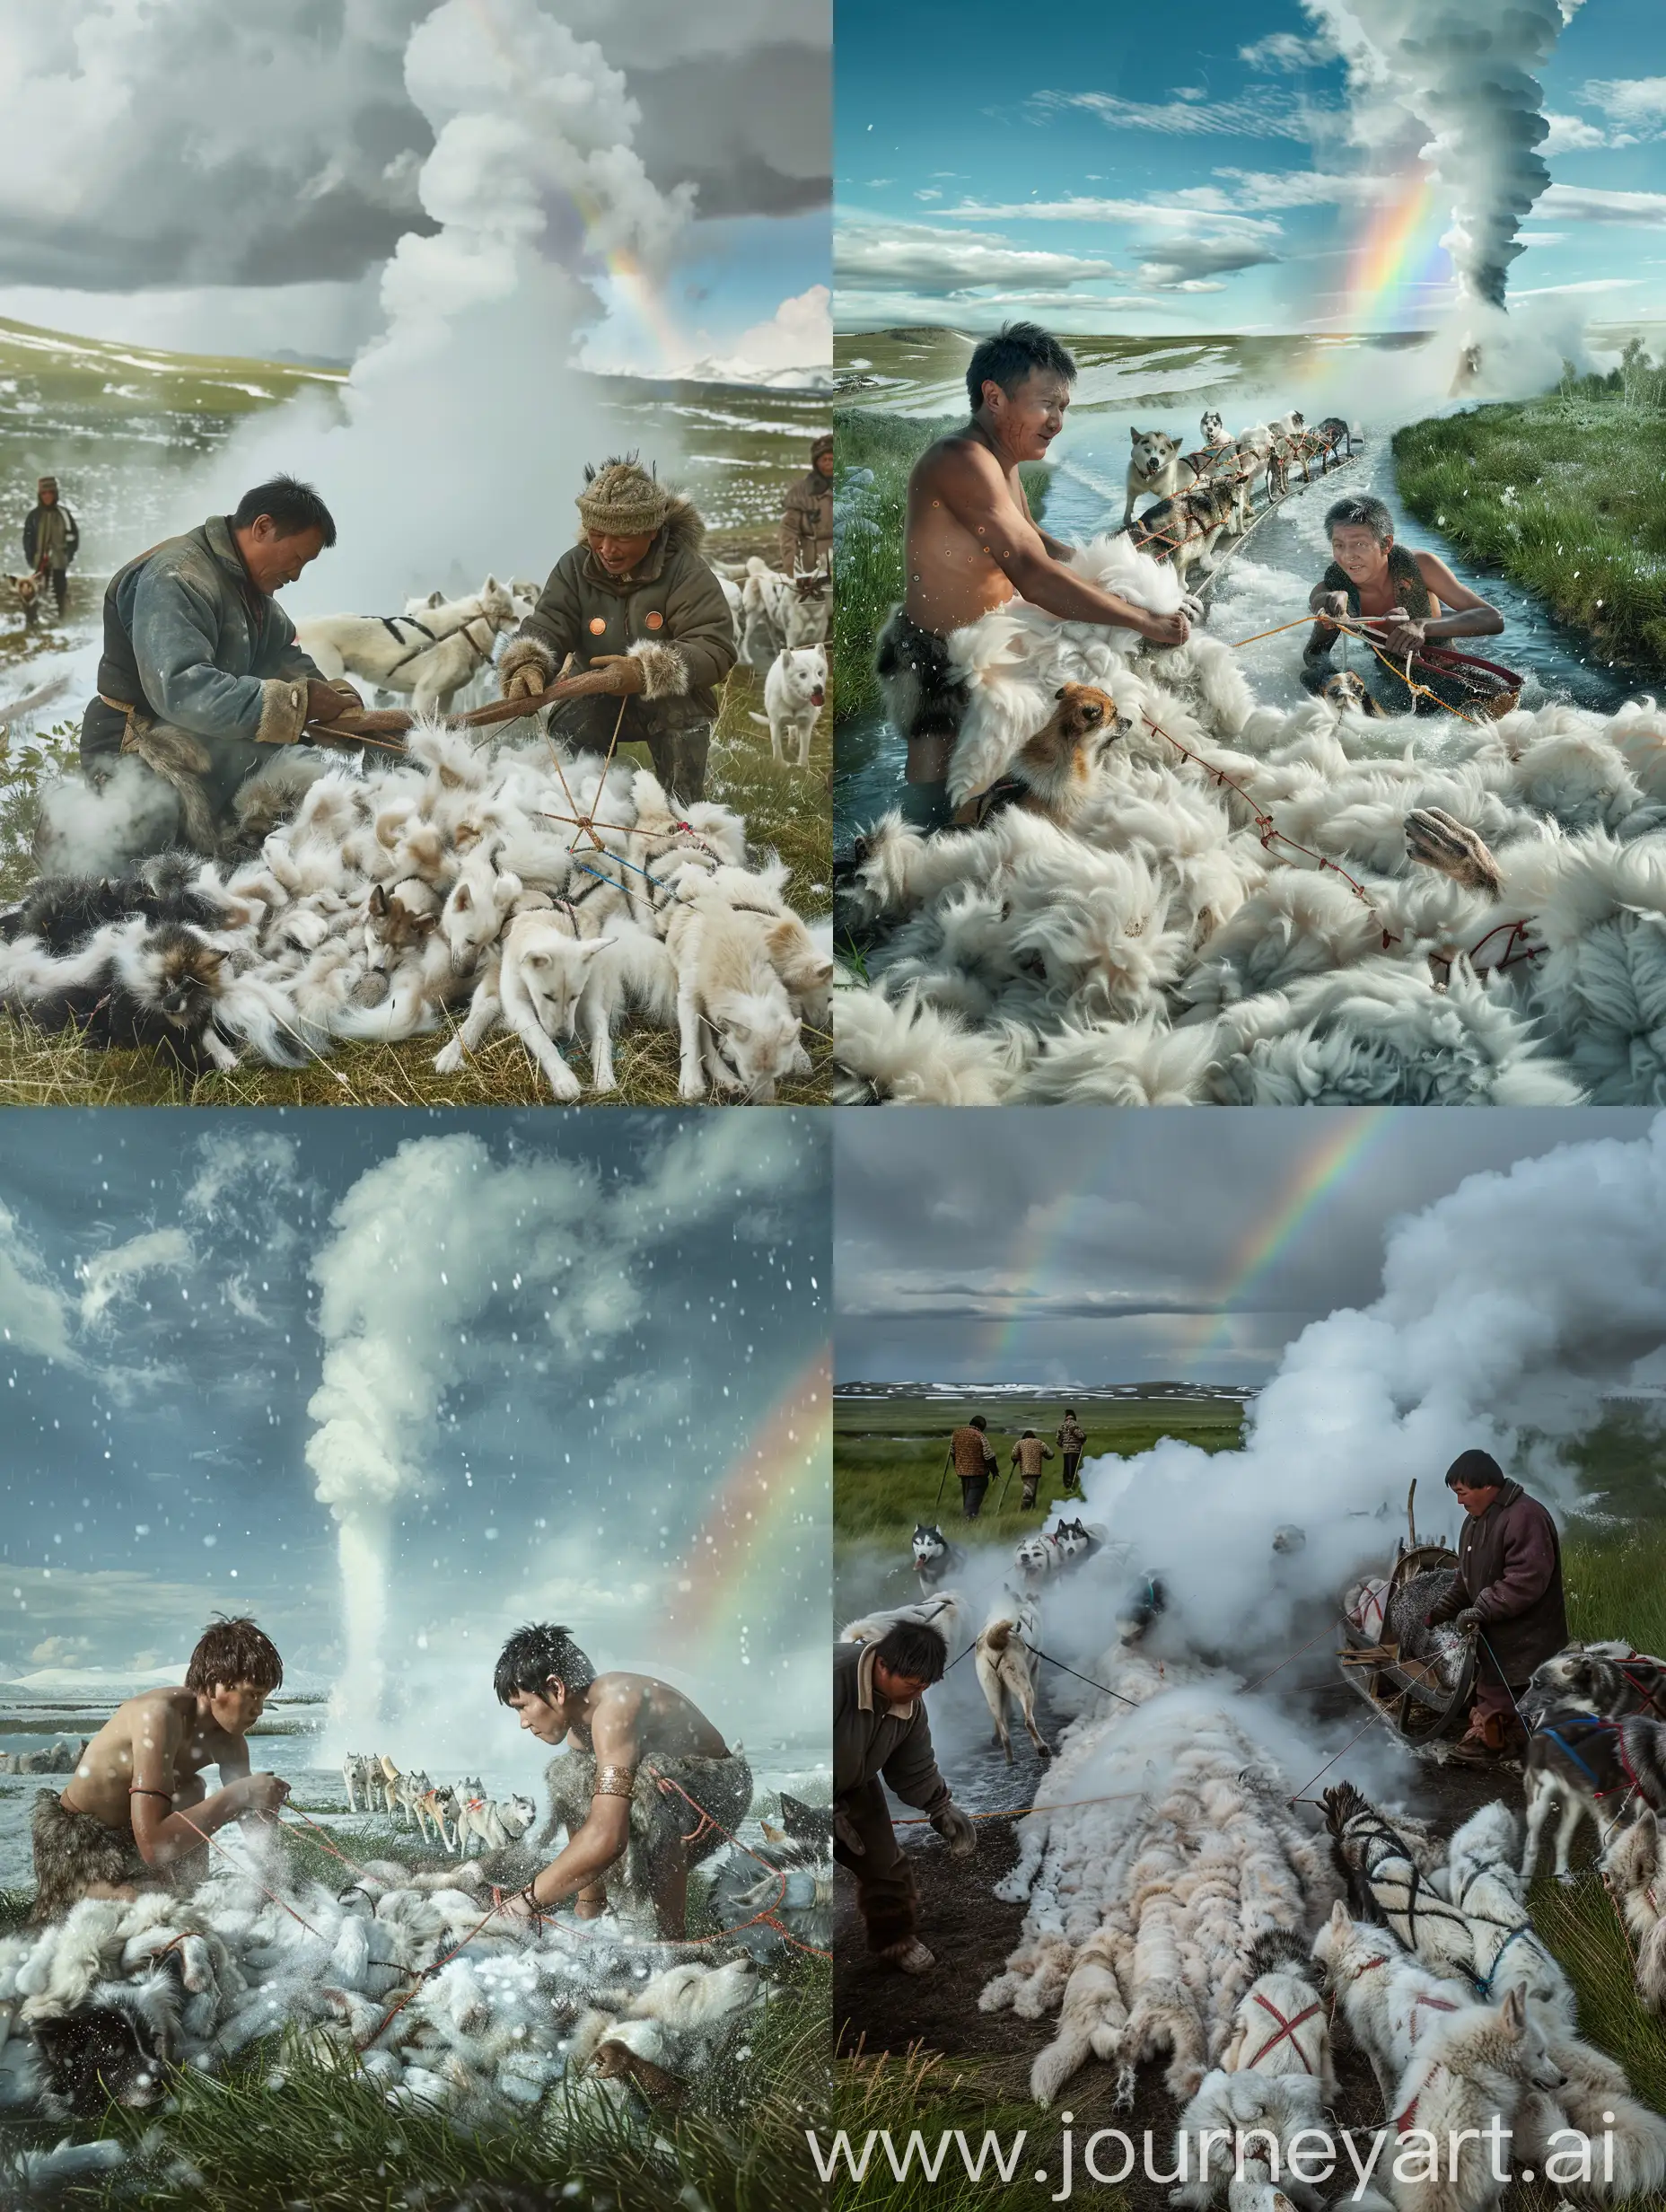 Brothers-Removing-Fur-Transforming-Winter-Landscape-with-Dog-Teams-and-Rainbow